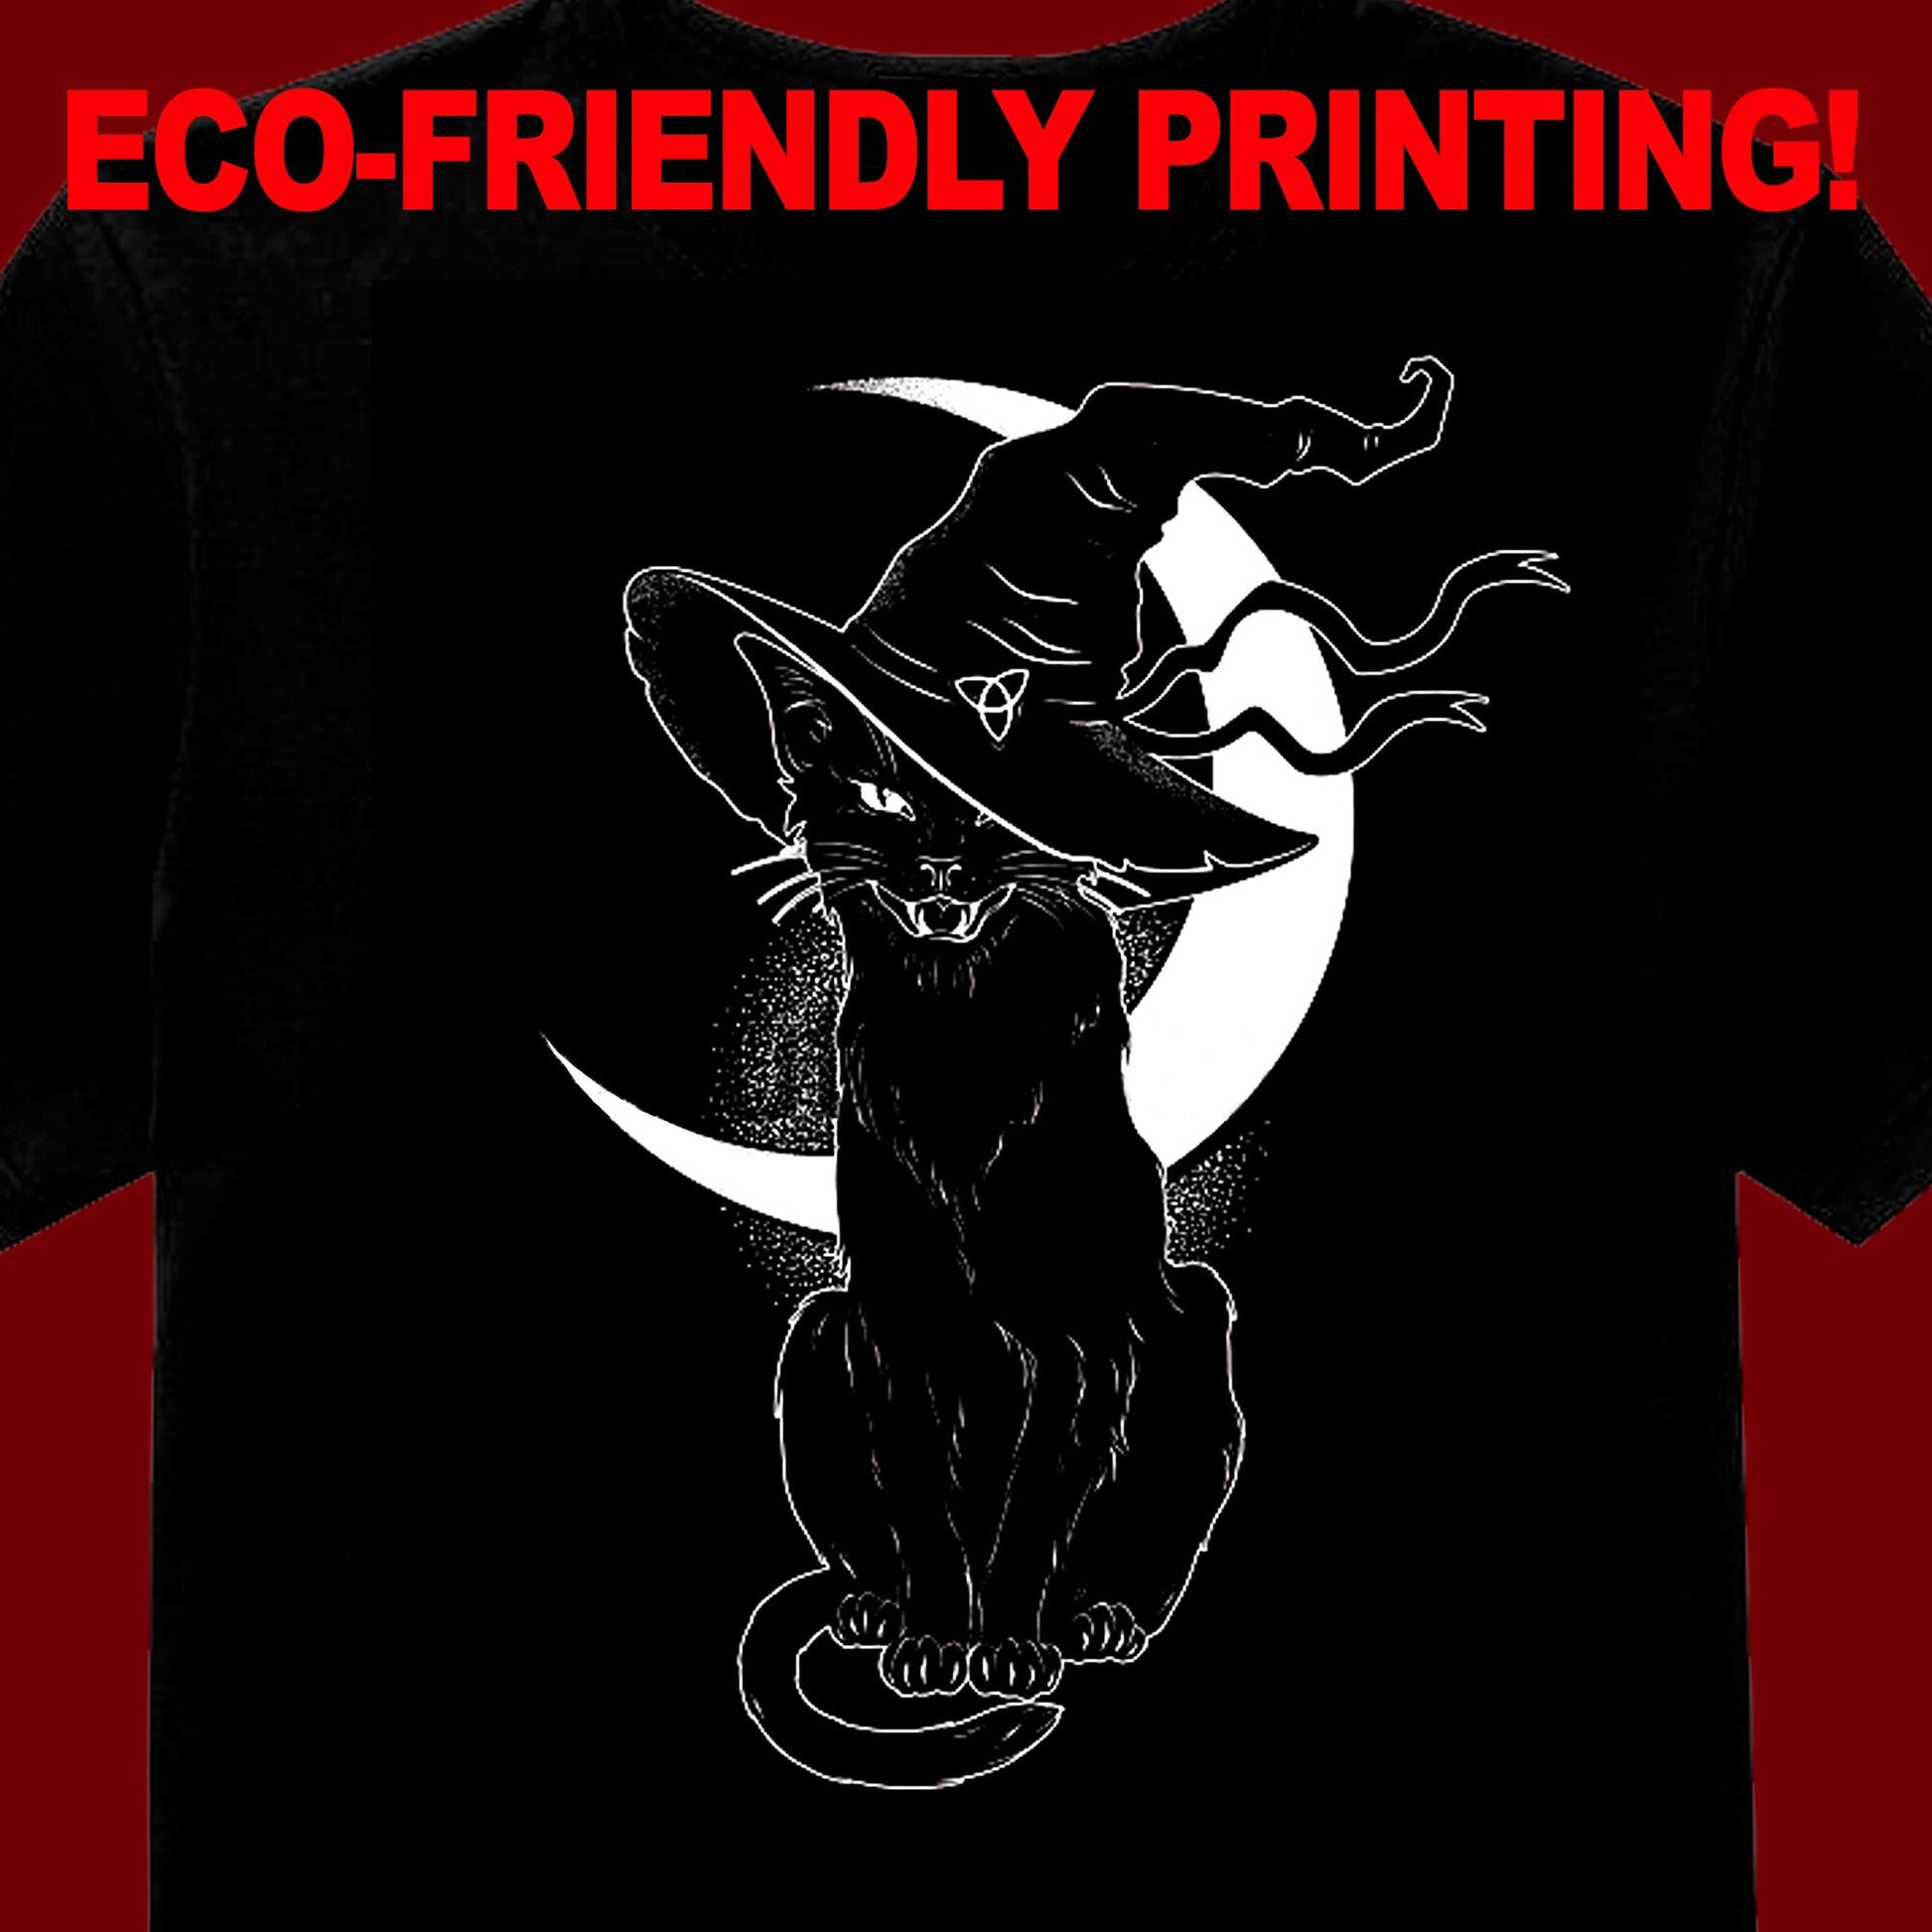 CatWitch, Gothic tee, Goth shirt, Black Cat Gift